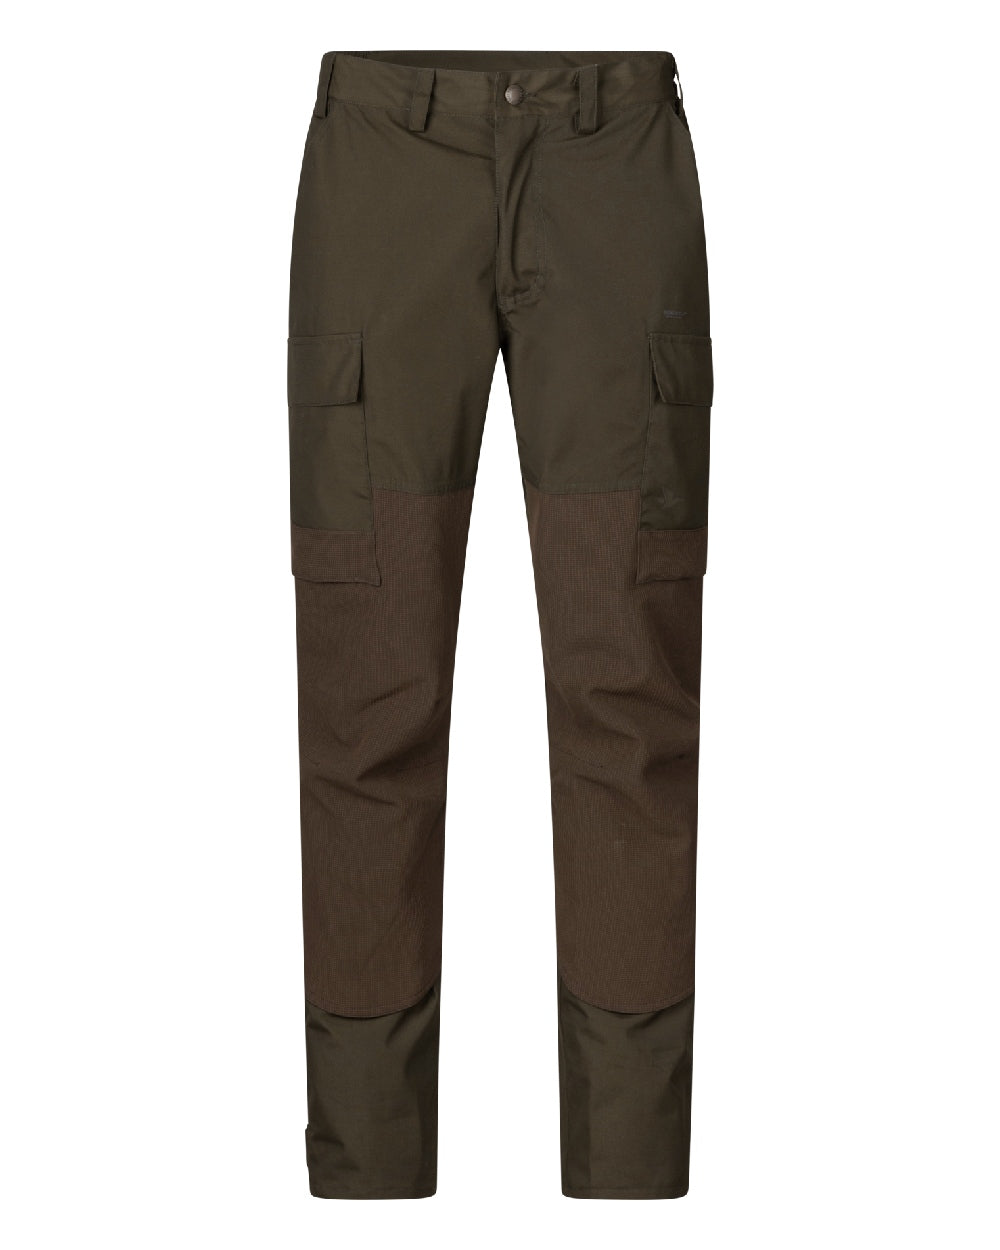 Seeland Arden Trousers in Pine Green